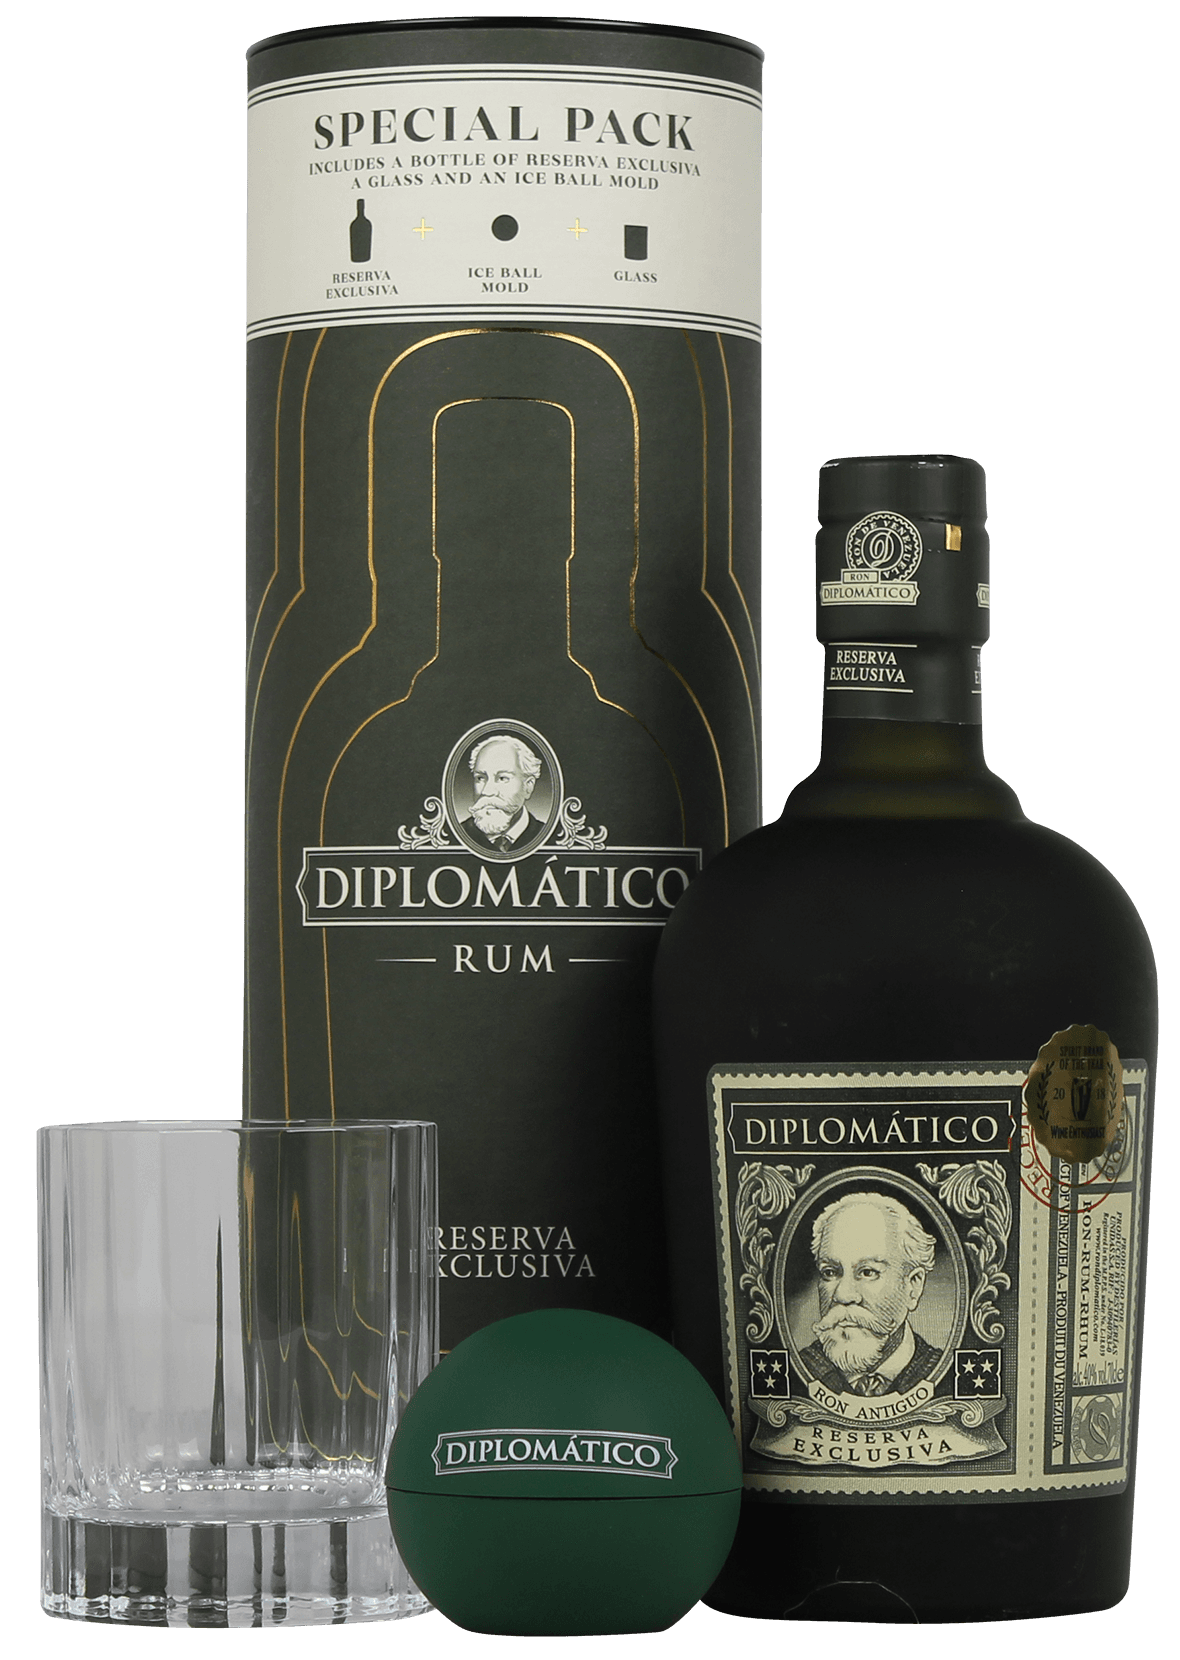 Ron Diplomatico Caribe Kaliman - 40% Exclusiva Reserva Canister alcohol Rum | Tall